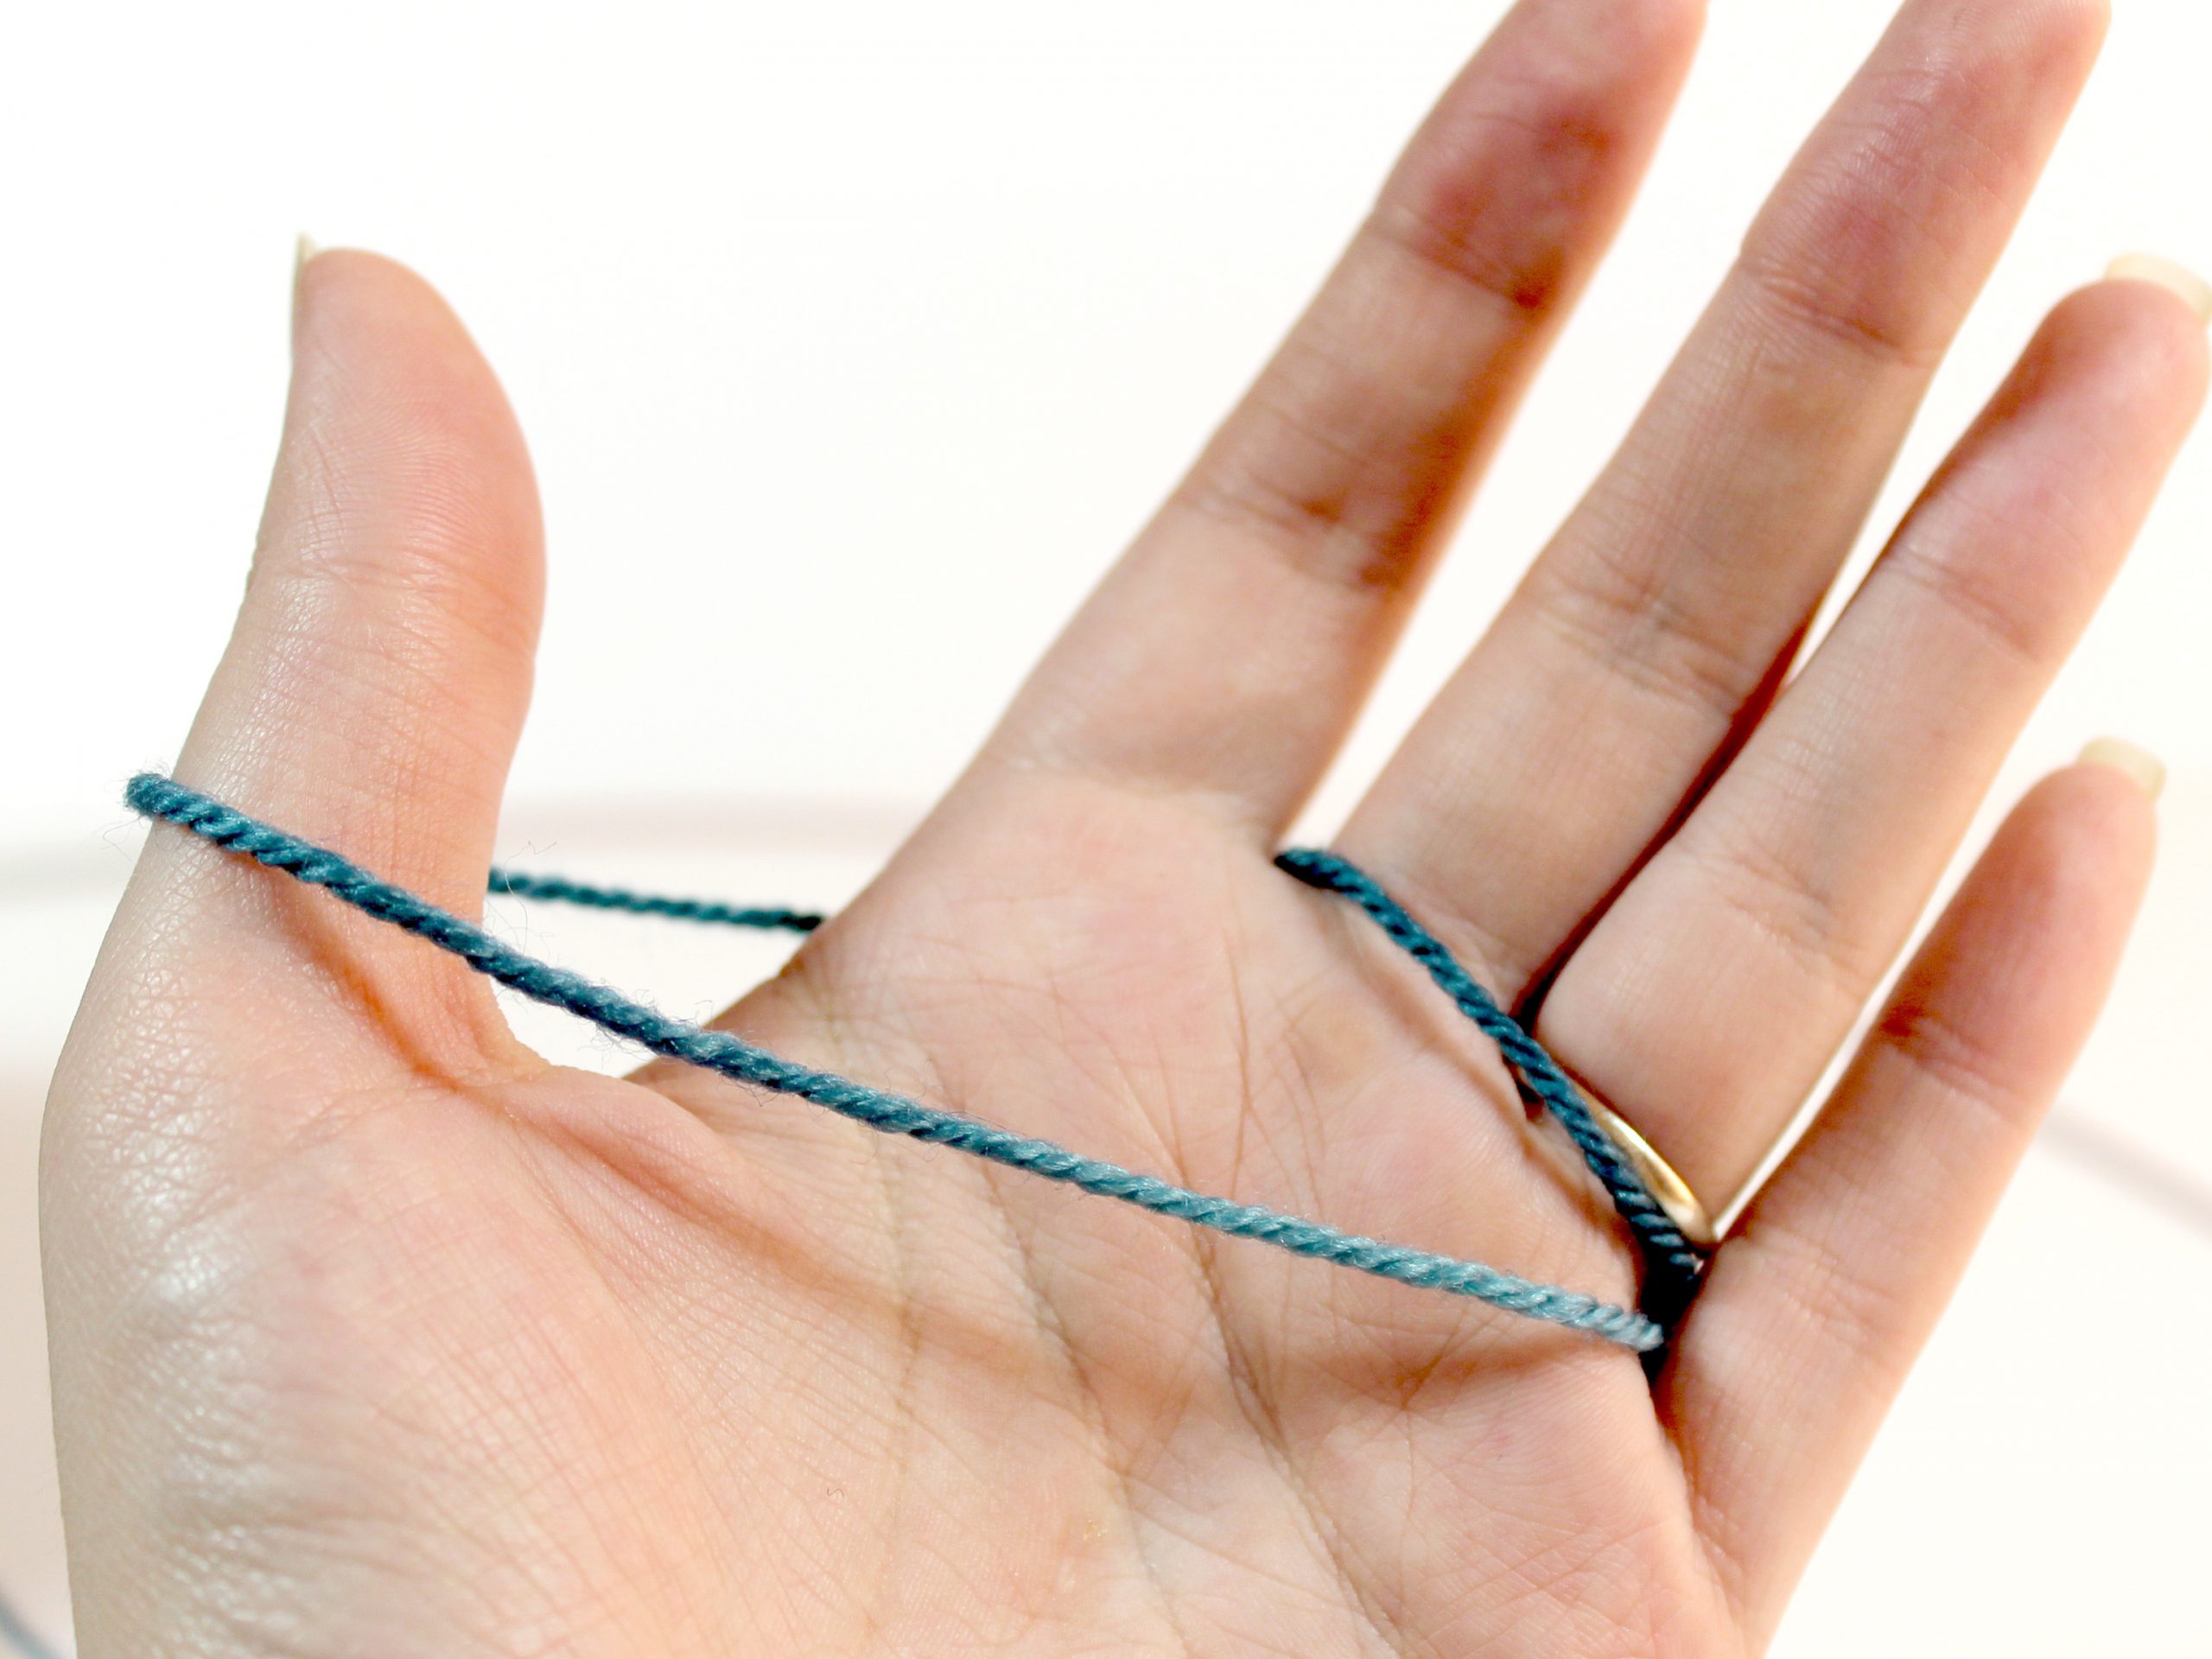 A left hand with yarn wrapped around it. The yarn starts between the ring and little finger, crosses the palm, wraps behind the thumb and index finger, then crosses the palm in front of the middle and ring fingers before finishing where it started.